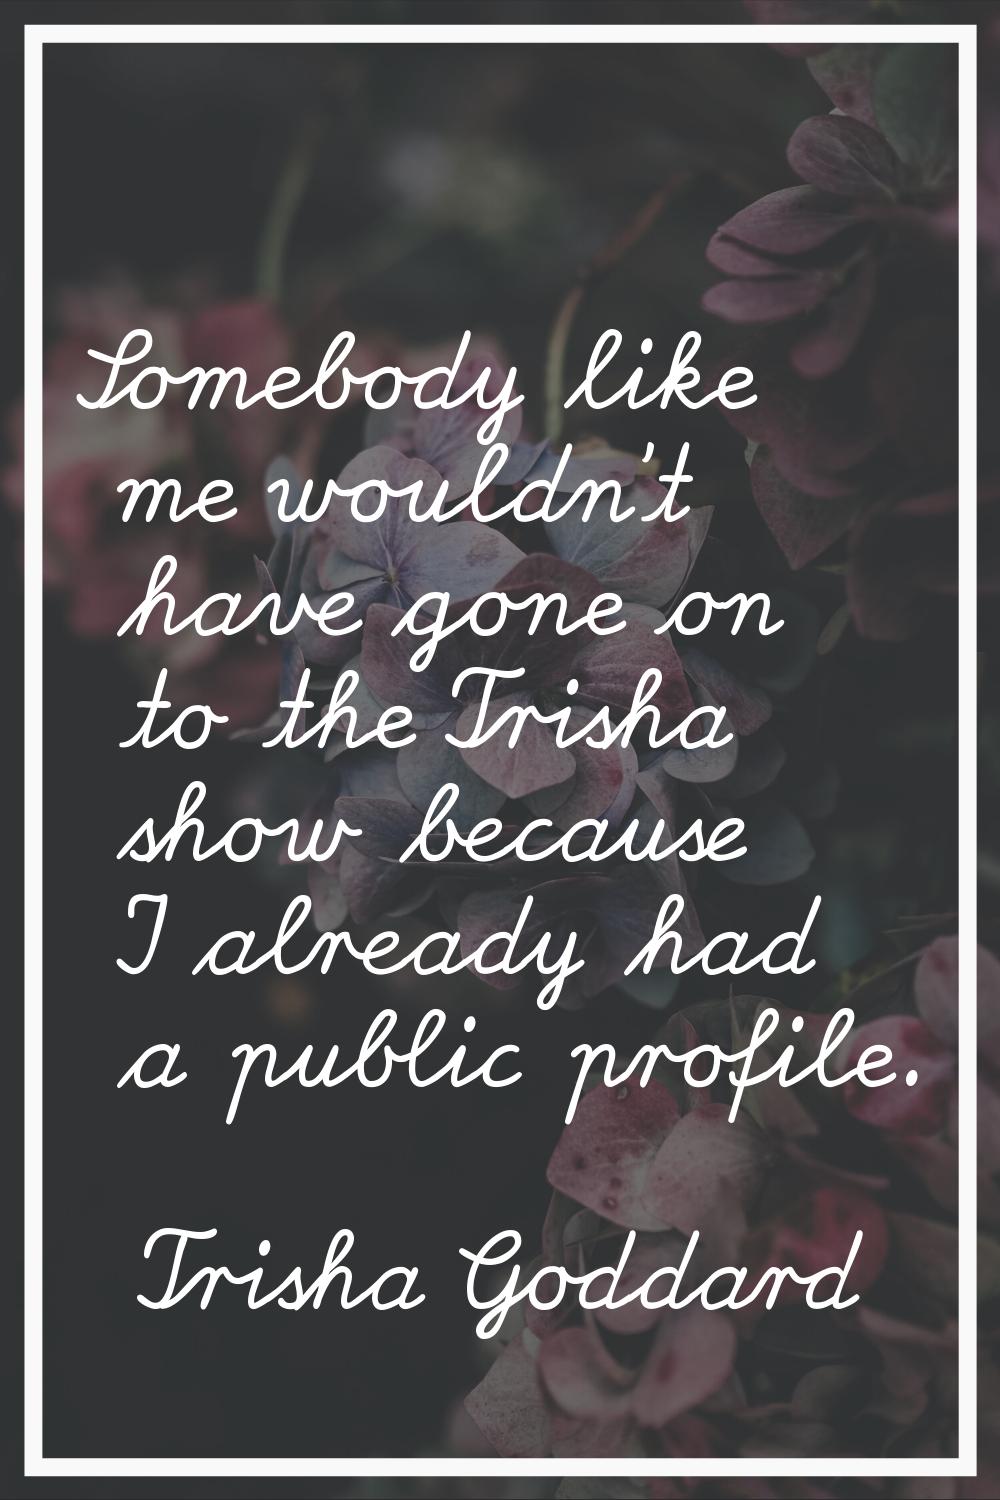 Somebody like me wouldn't have gone on to the Trisha show because I already had a public profile.